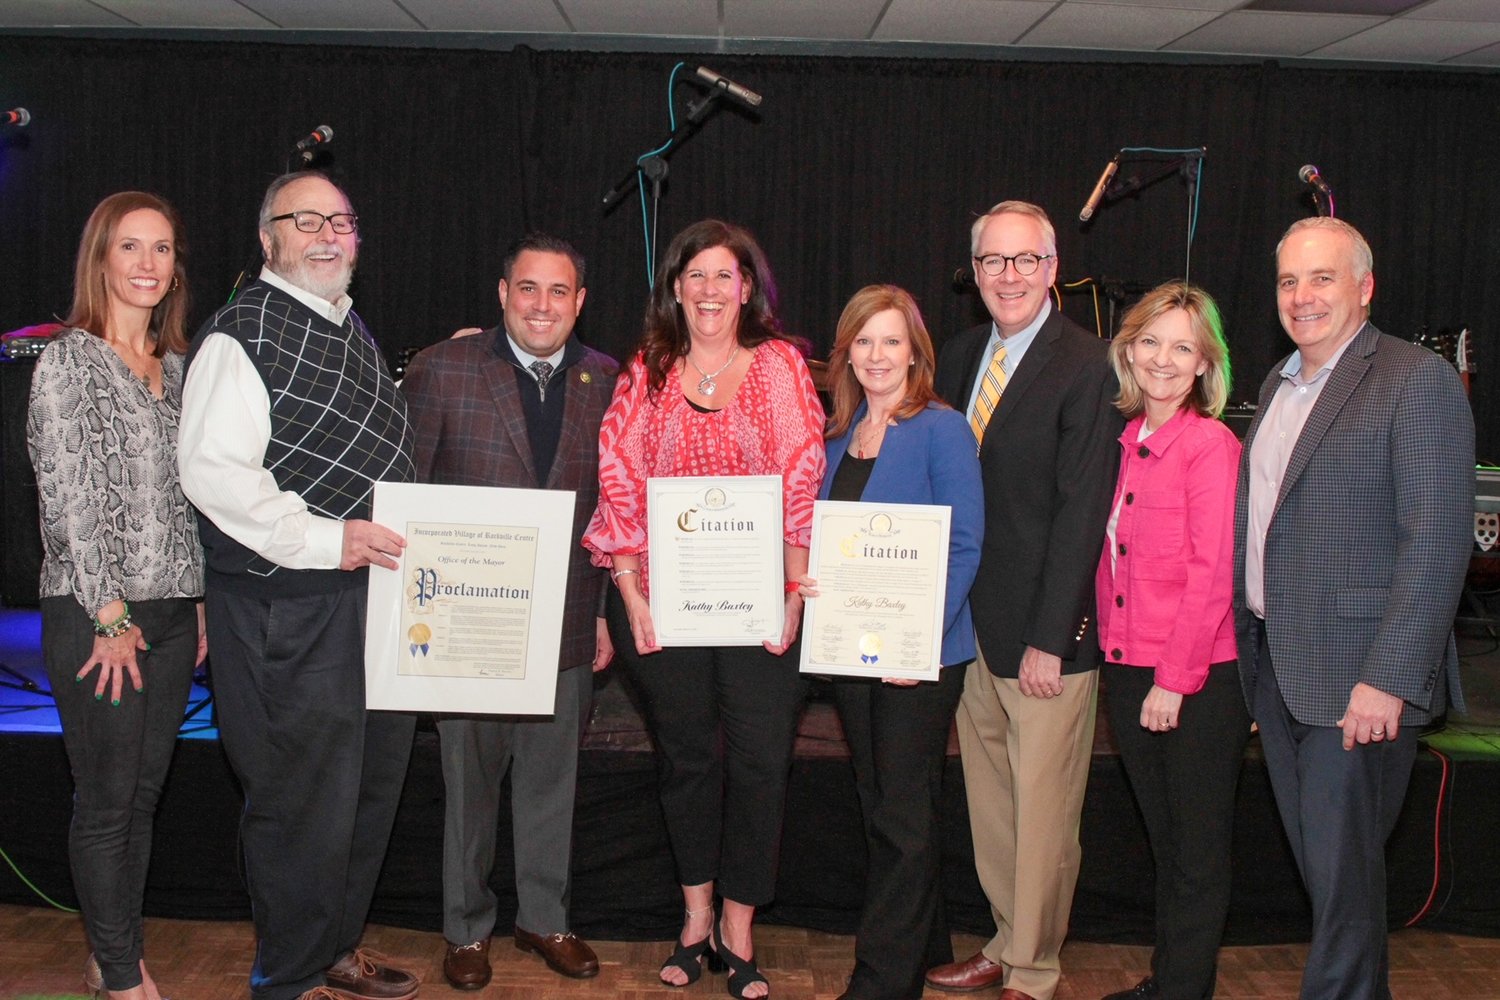 Rockville Centre Deputy Mayor Kathy Baxley, center, is honored by Village Trustee Katie Conlon, left, Mayor Francis Murray, U.S. Rep. Anthony D’Esposito, Hempstead Town Councilwoman Laura Ryder, Hempstead Town Supervisor Don Clavin, RVC School board Vice President Donna Downing, and Village Trustee Emilio Grillo for her service and dedication to Senior Services.